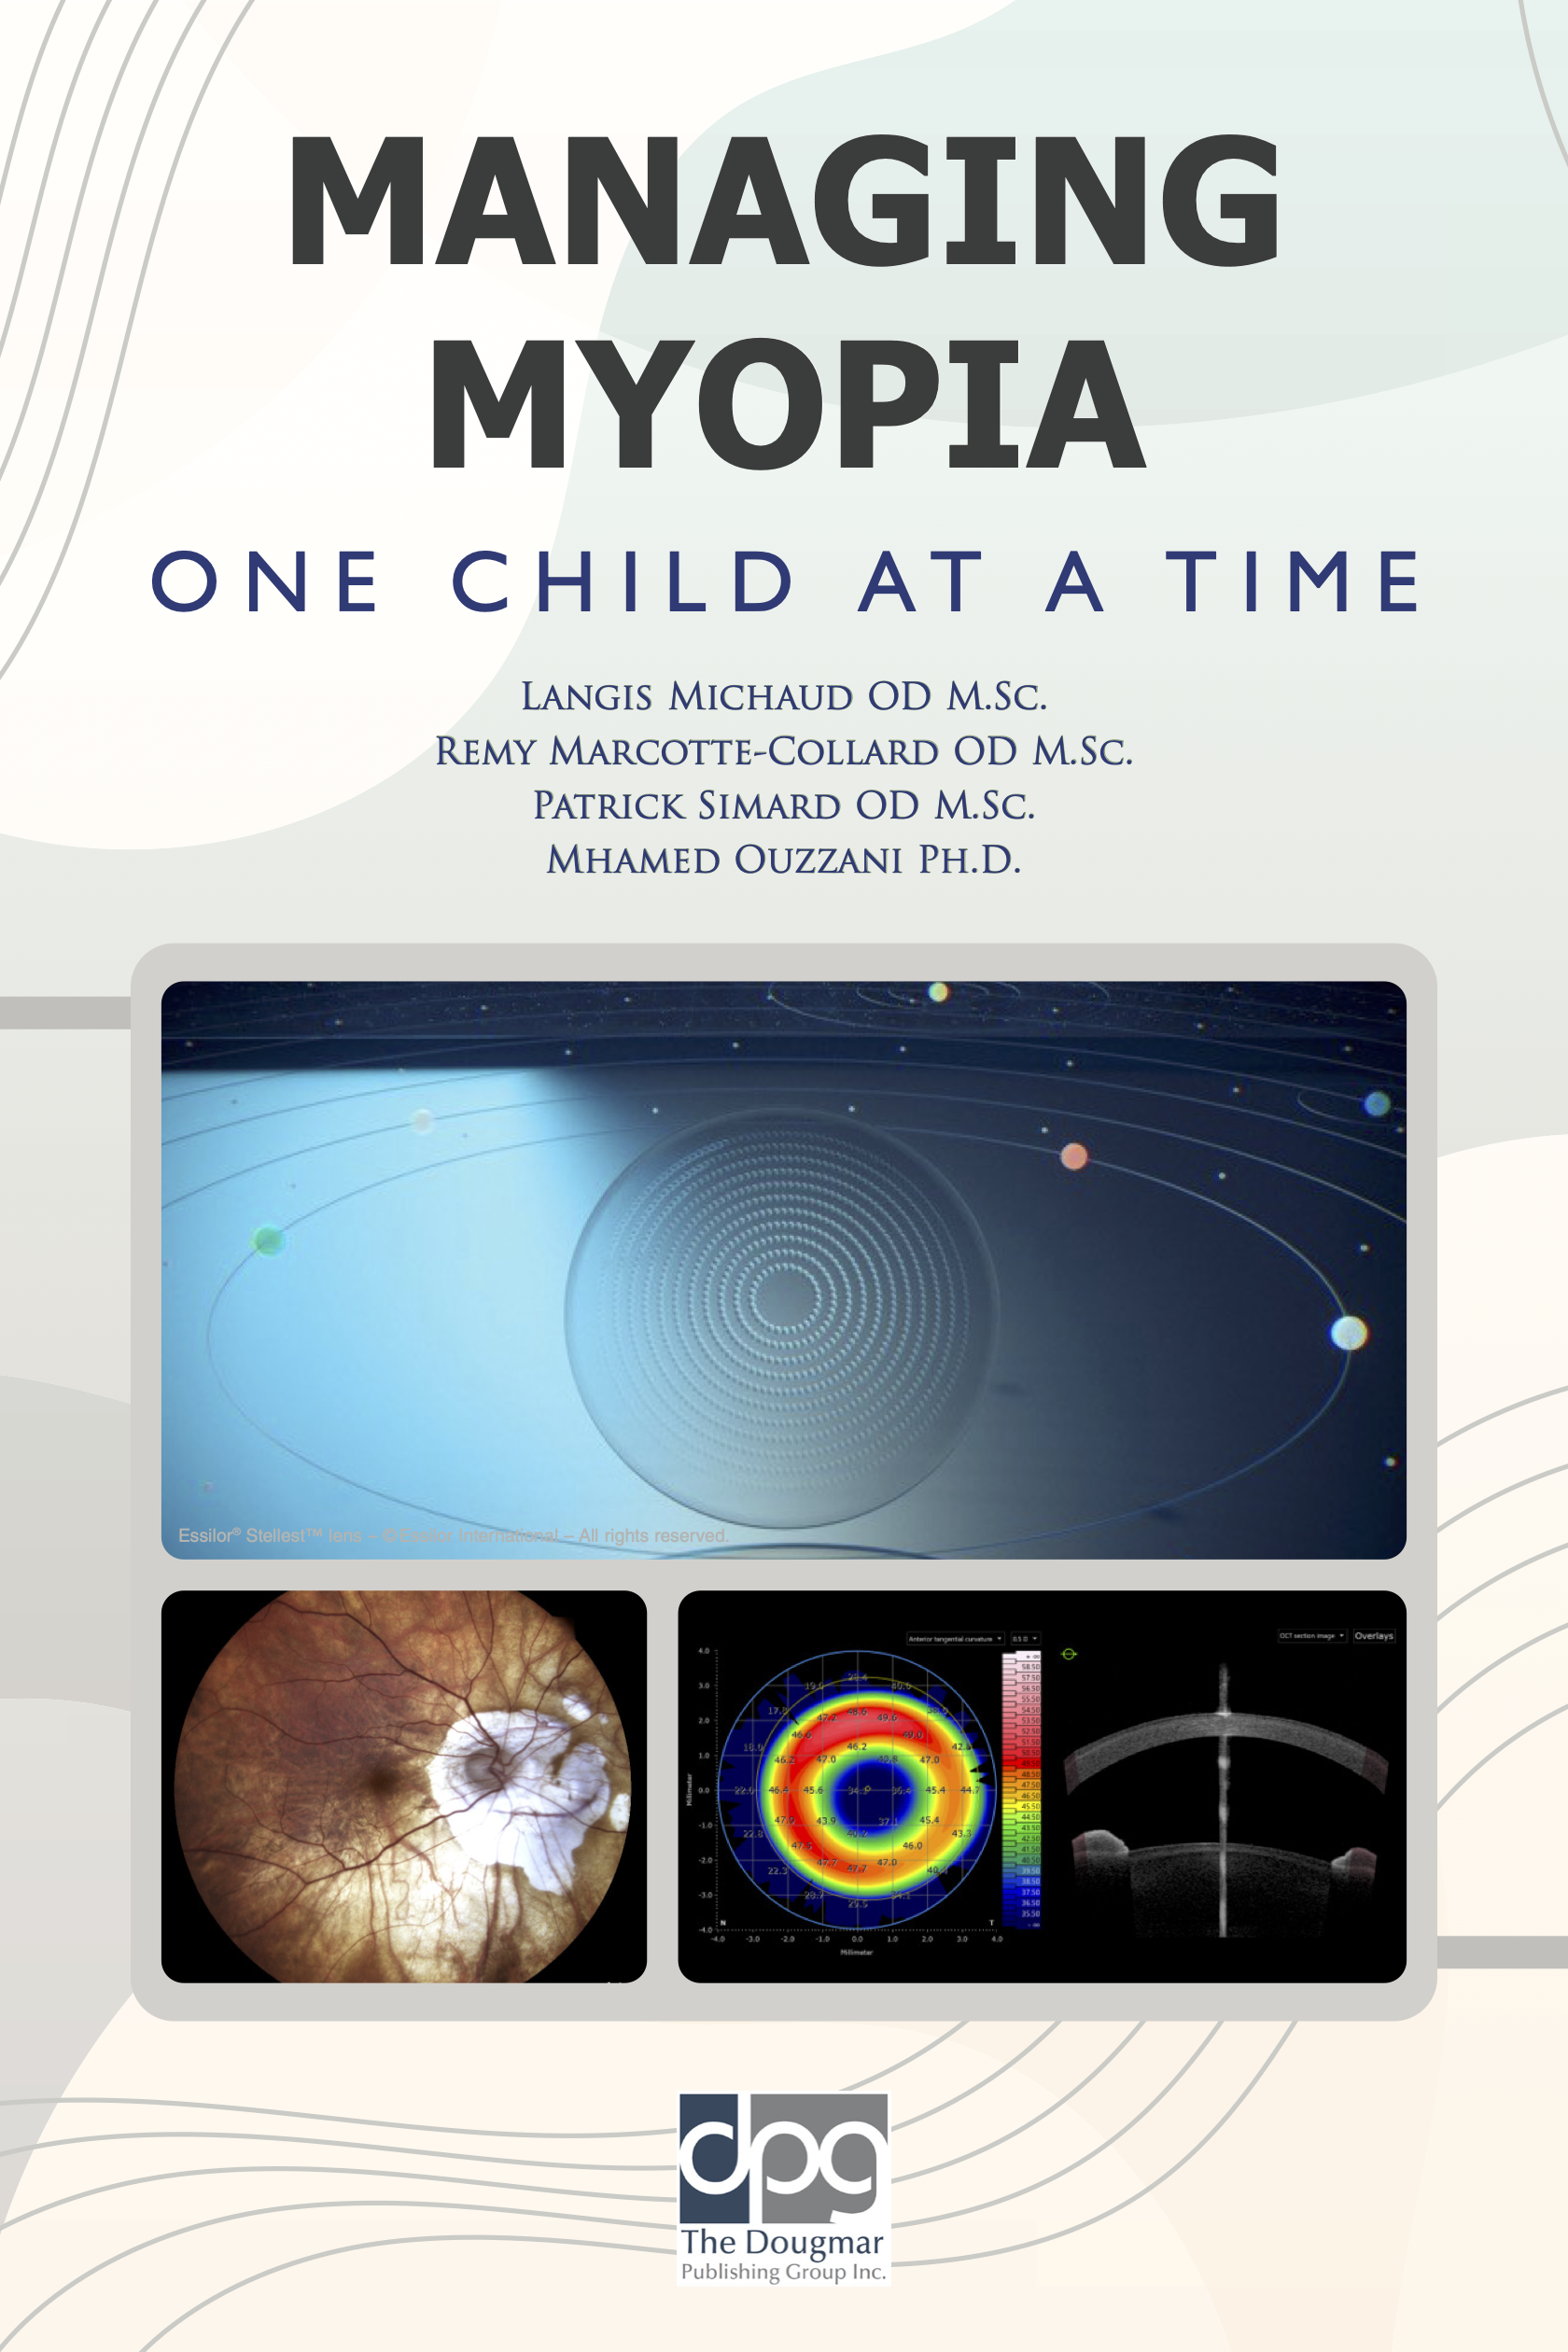 Book Review: Managing Myopia Child At A Time - Review of Myopia